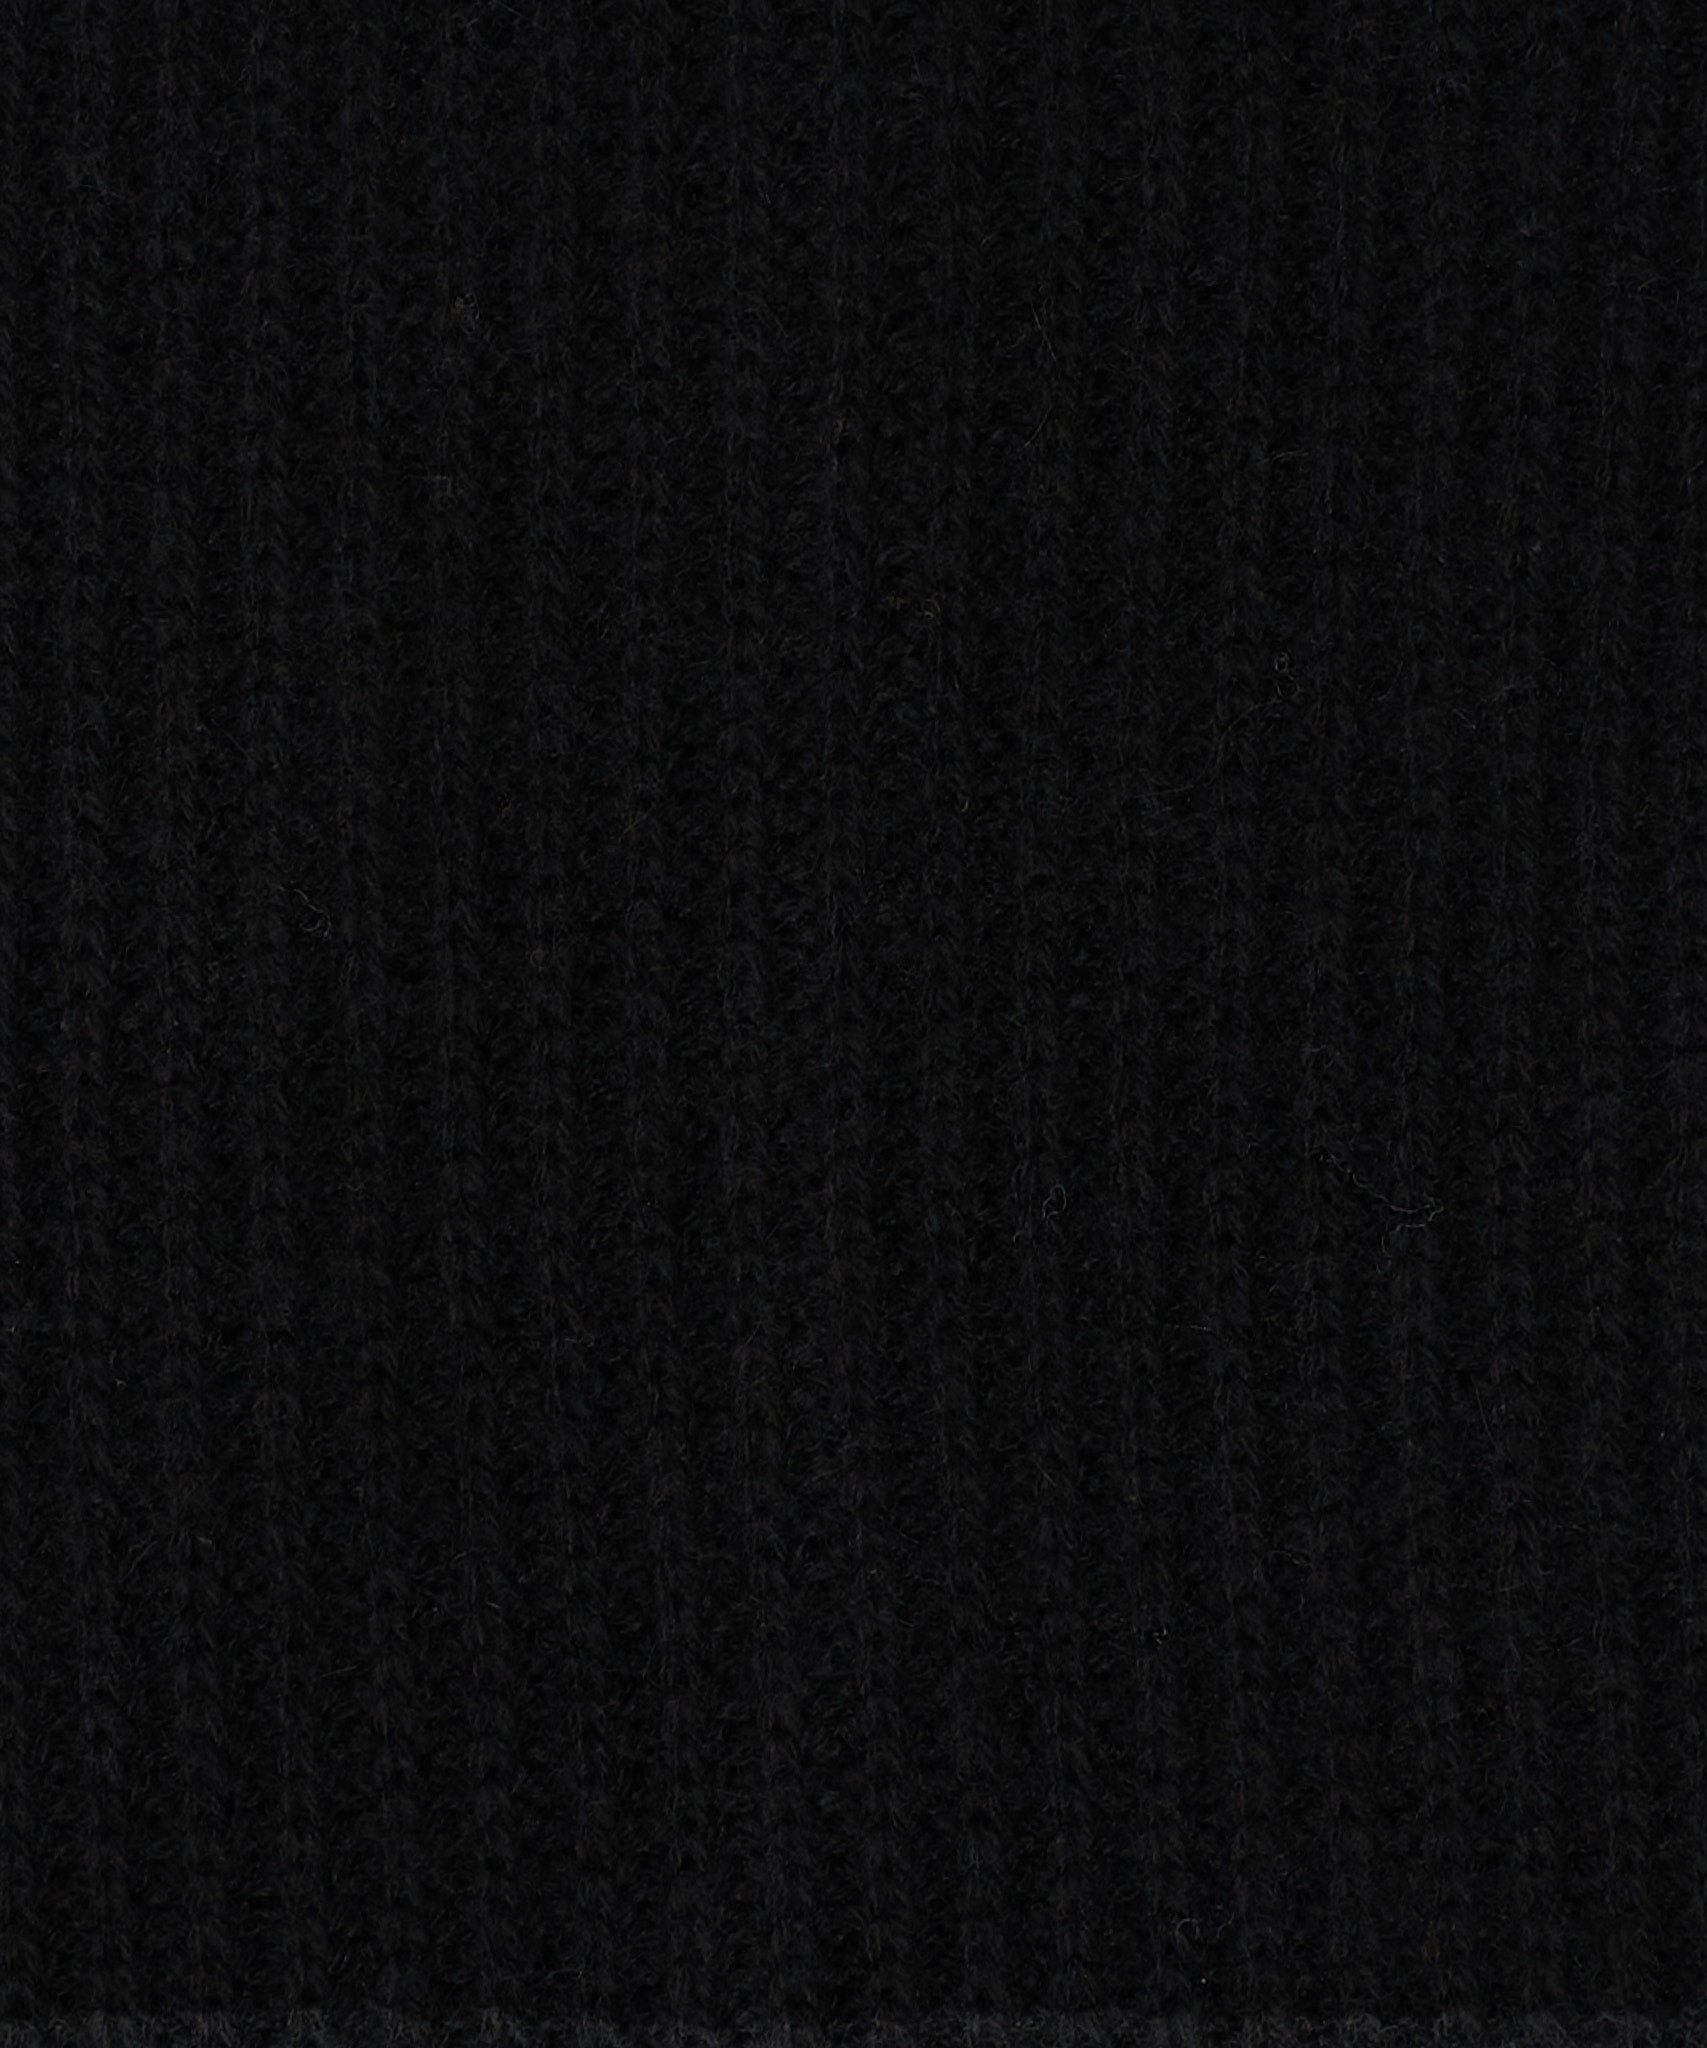 Wool/Cashmere  Neck Warmer in color Black